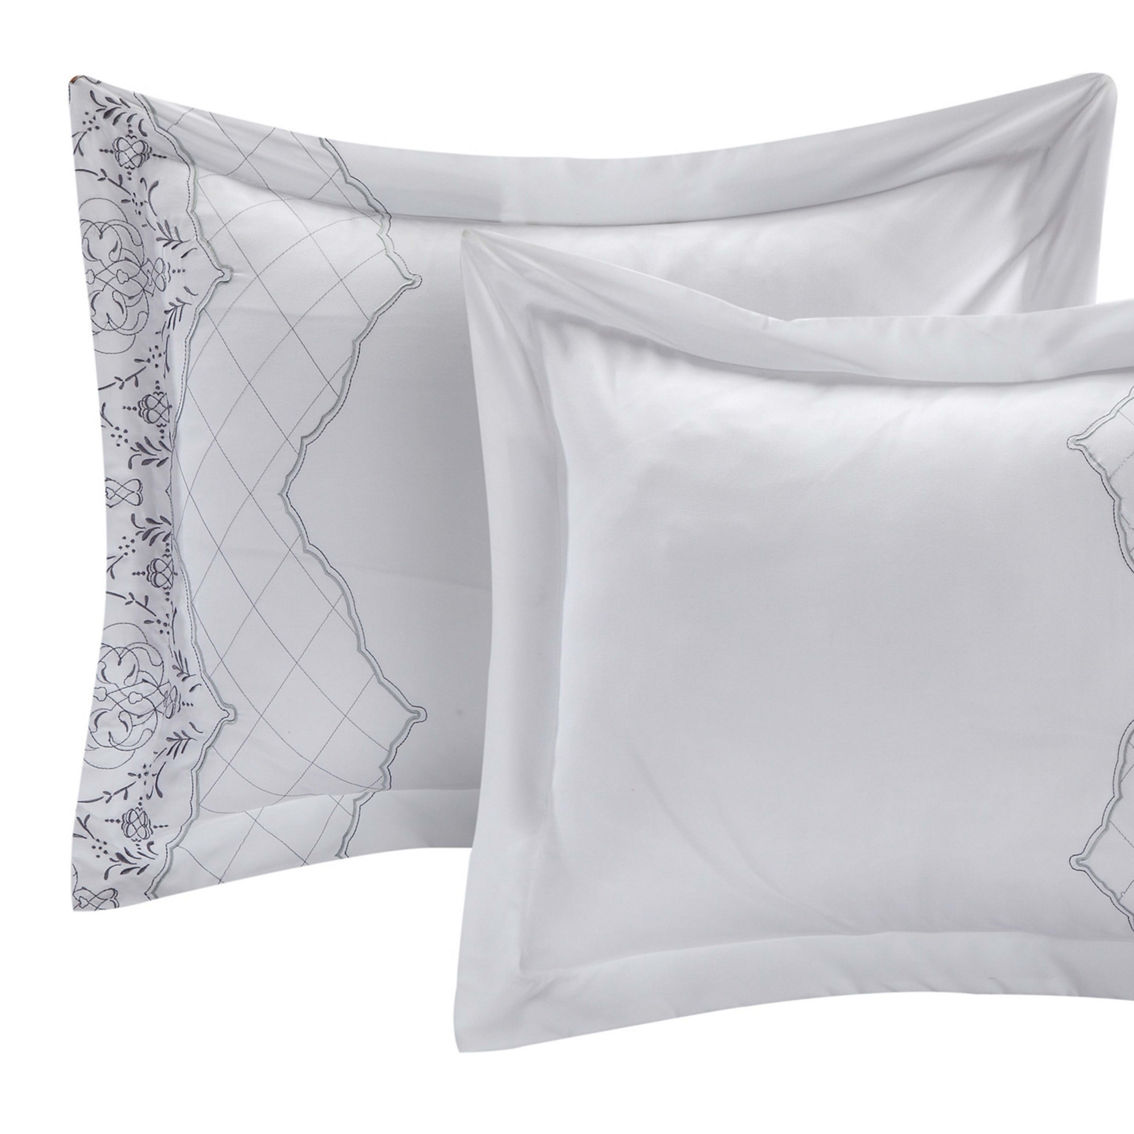 Chic Home Grace 12pc Comforter Set - Image 5 of 5